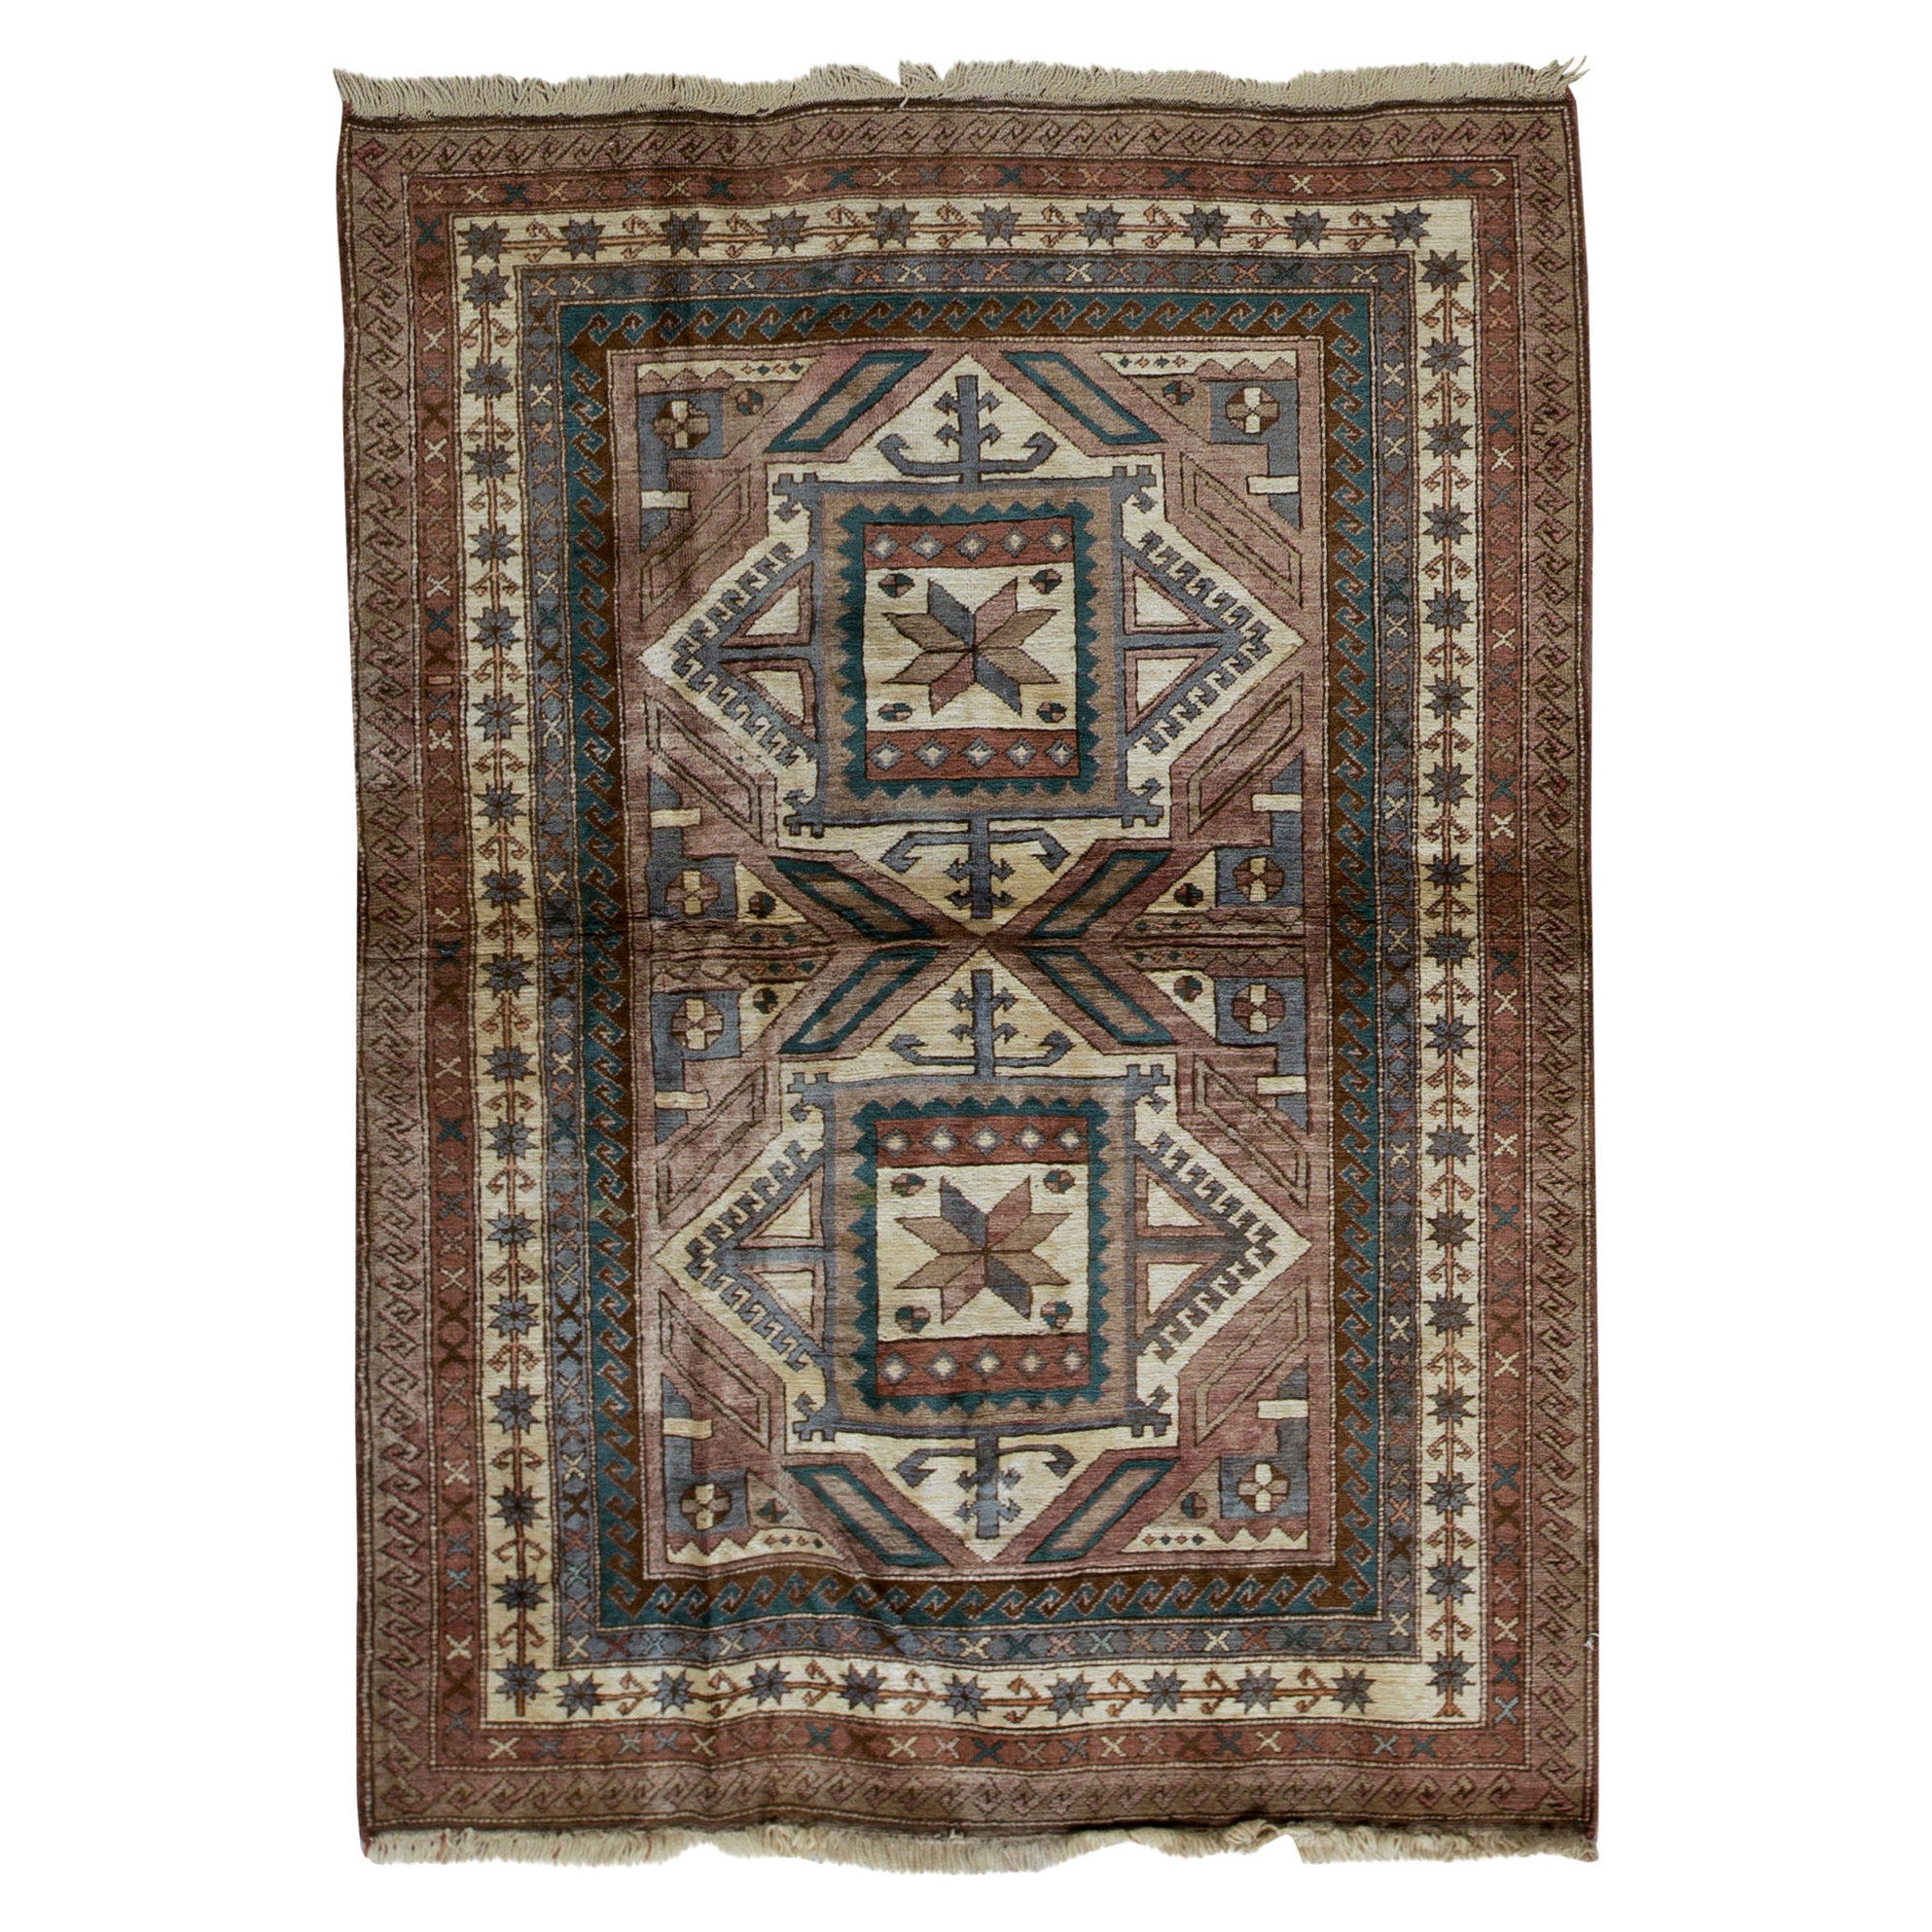 Antique Persian fine Traditional Handwoven Luxury Wool Multi